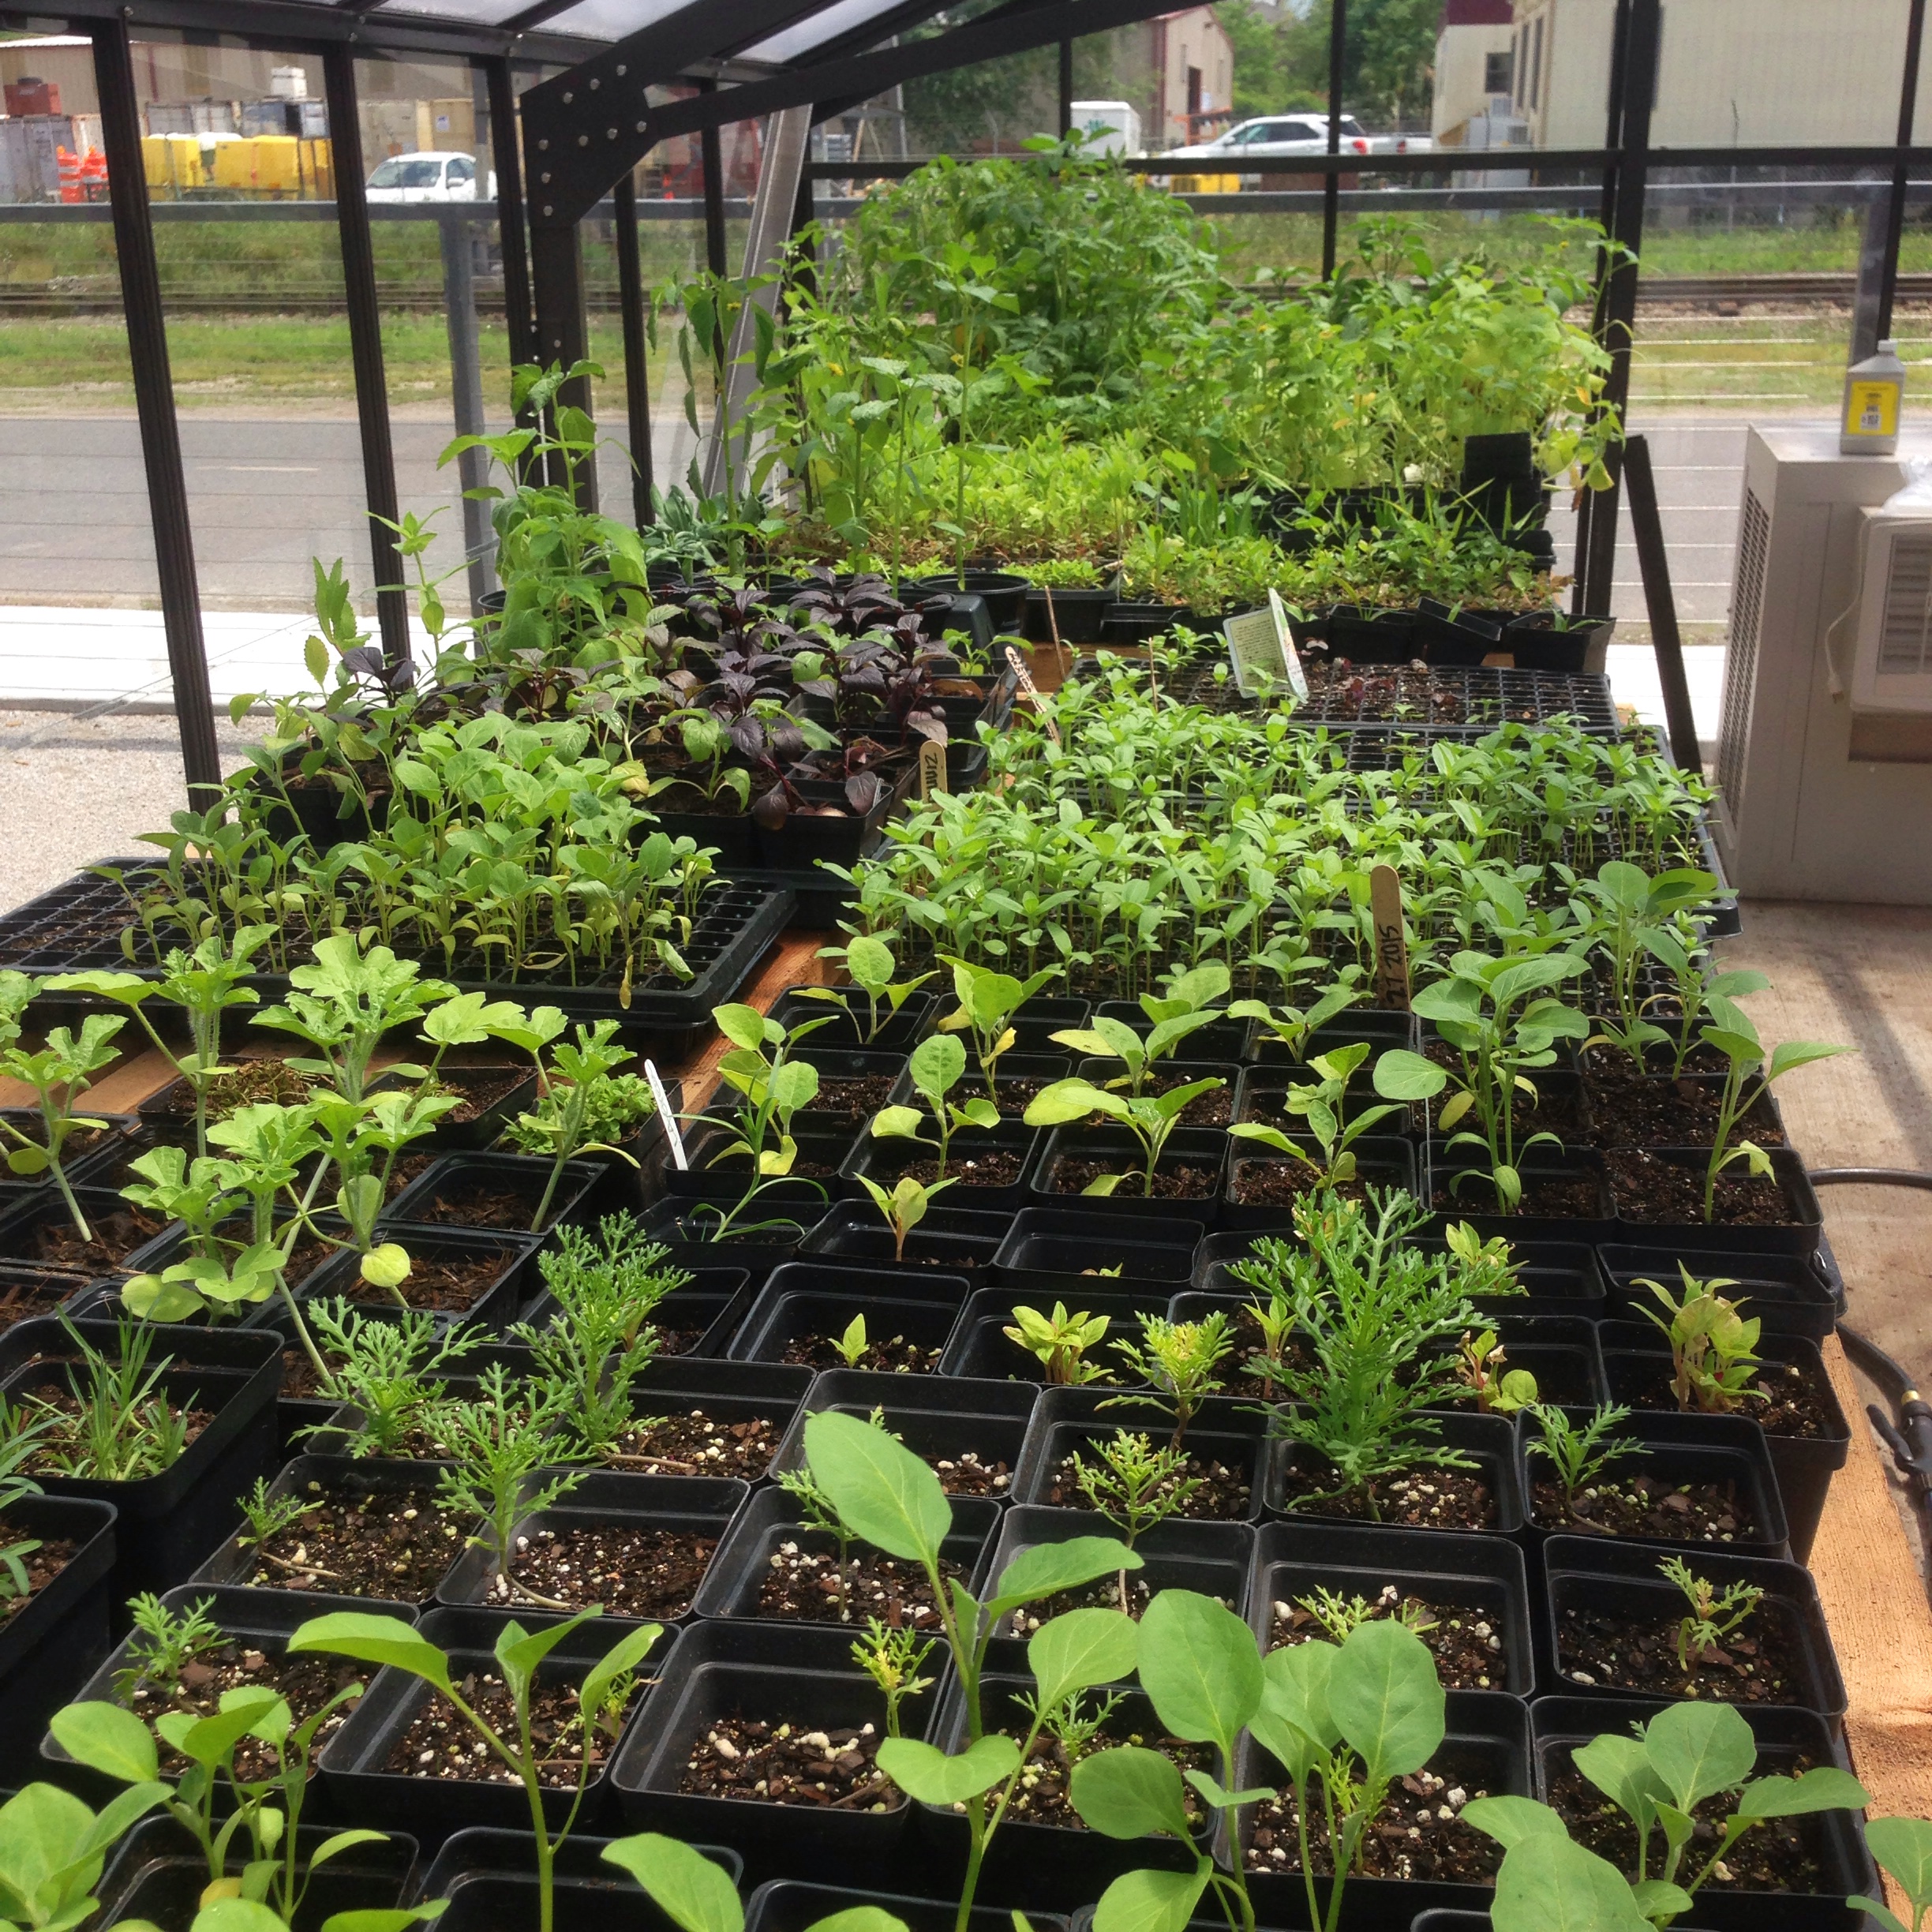 March 24: Spring plant sale with heirlooms and rare varieties!